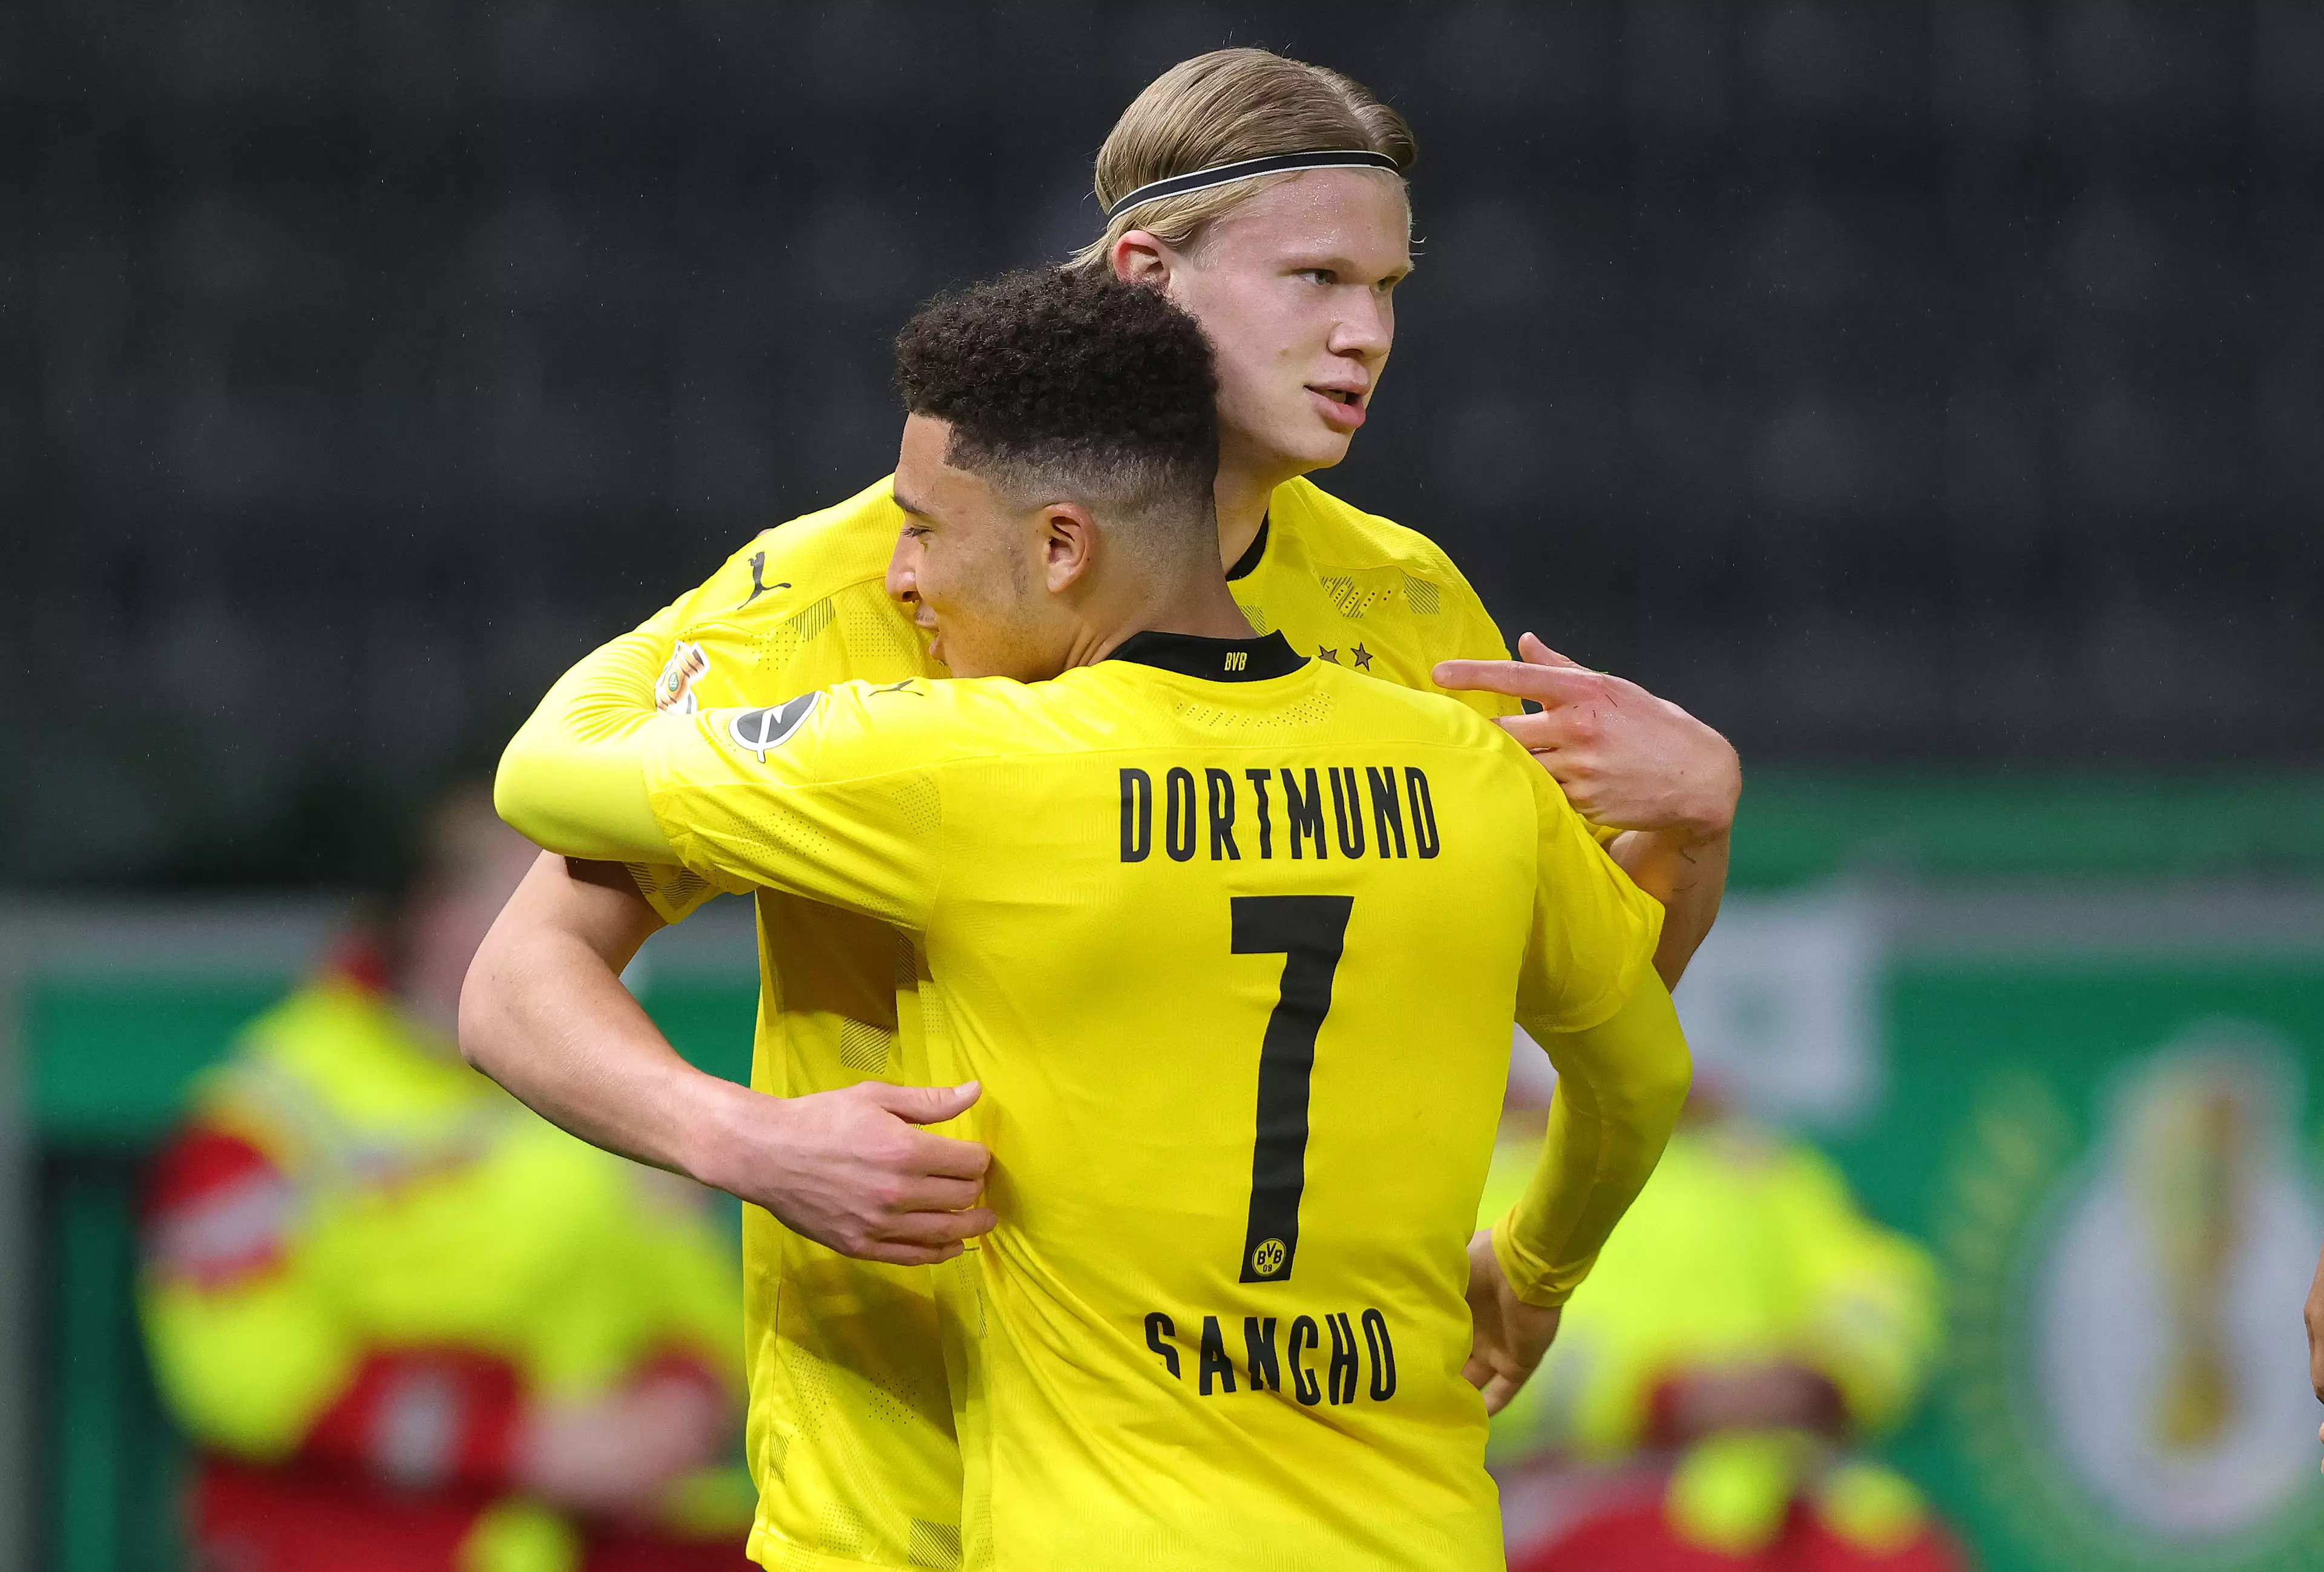 Sancho wears seven in Germany but looks set to change. Image: PA Images